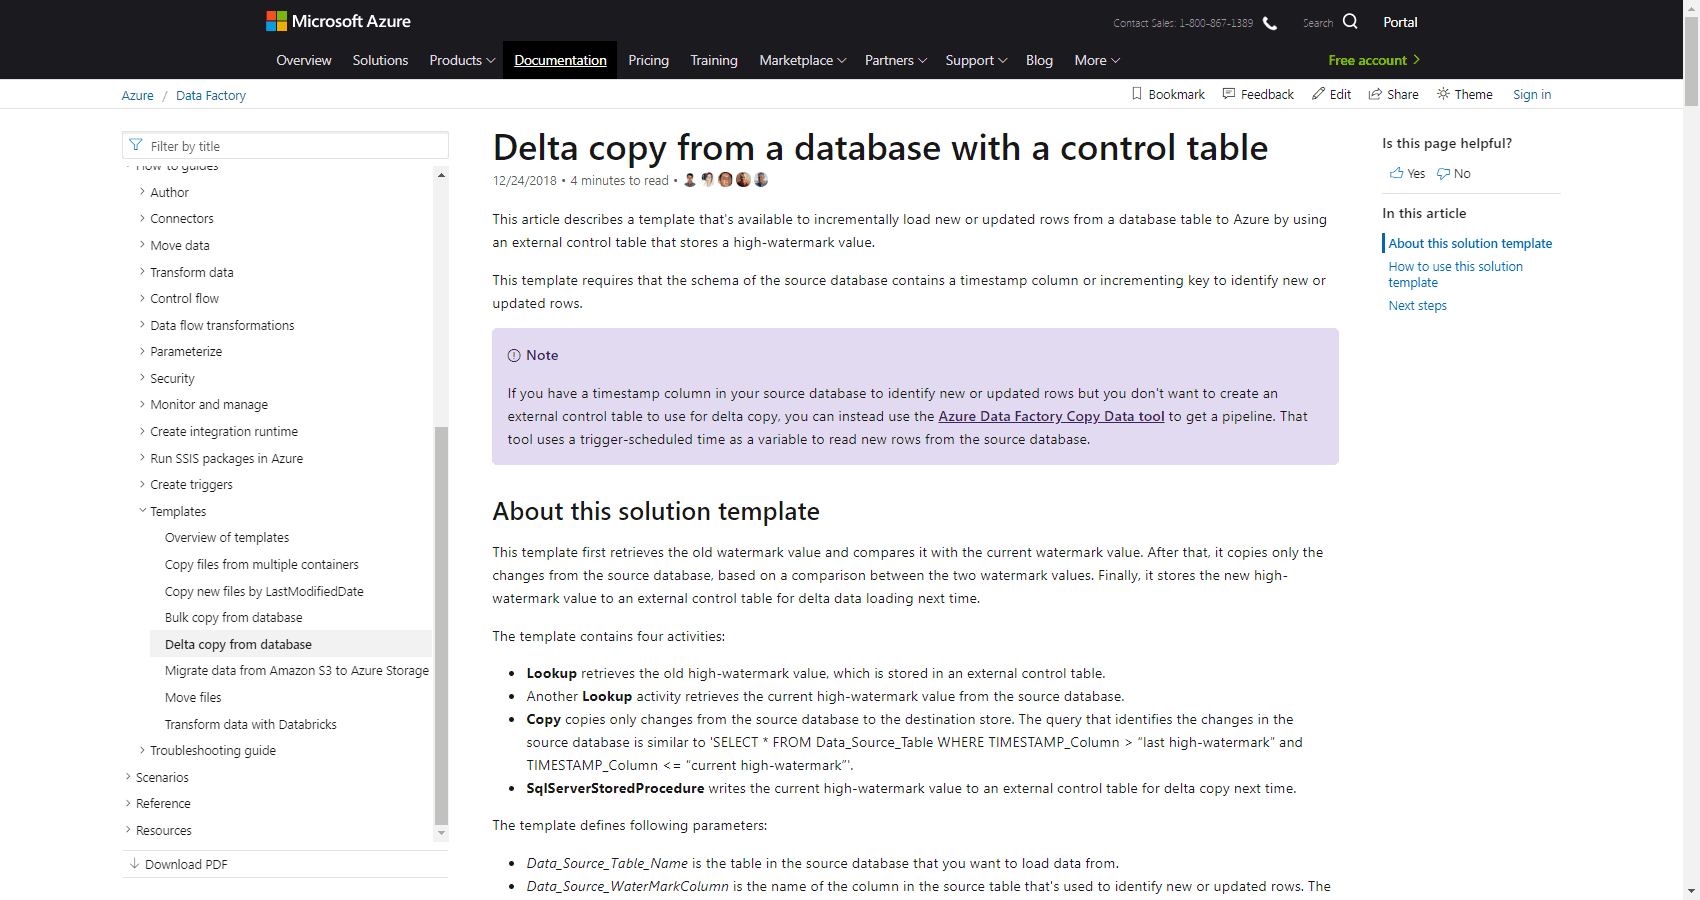 Screenshot of the official documentation for Azure Data Factory templates